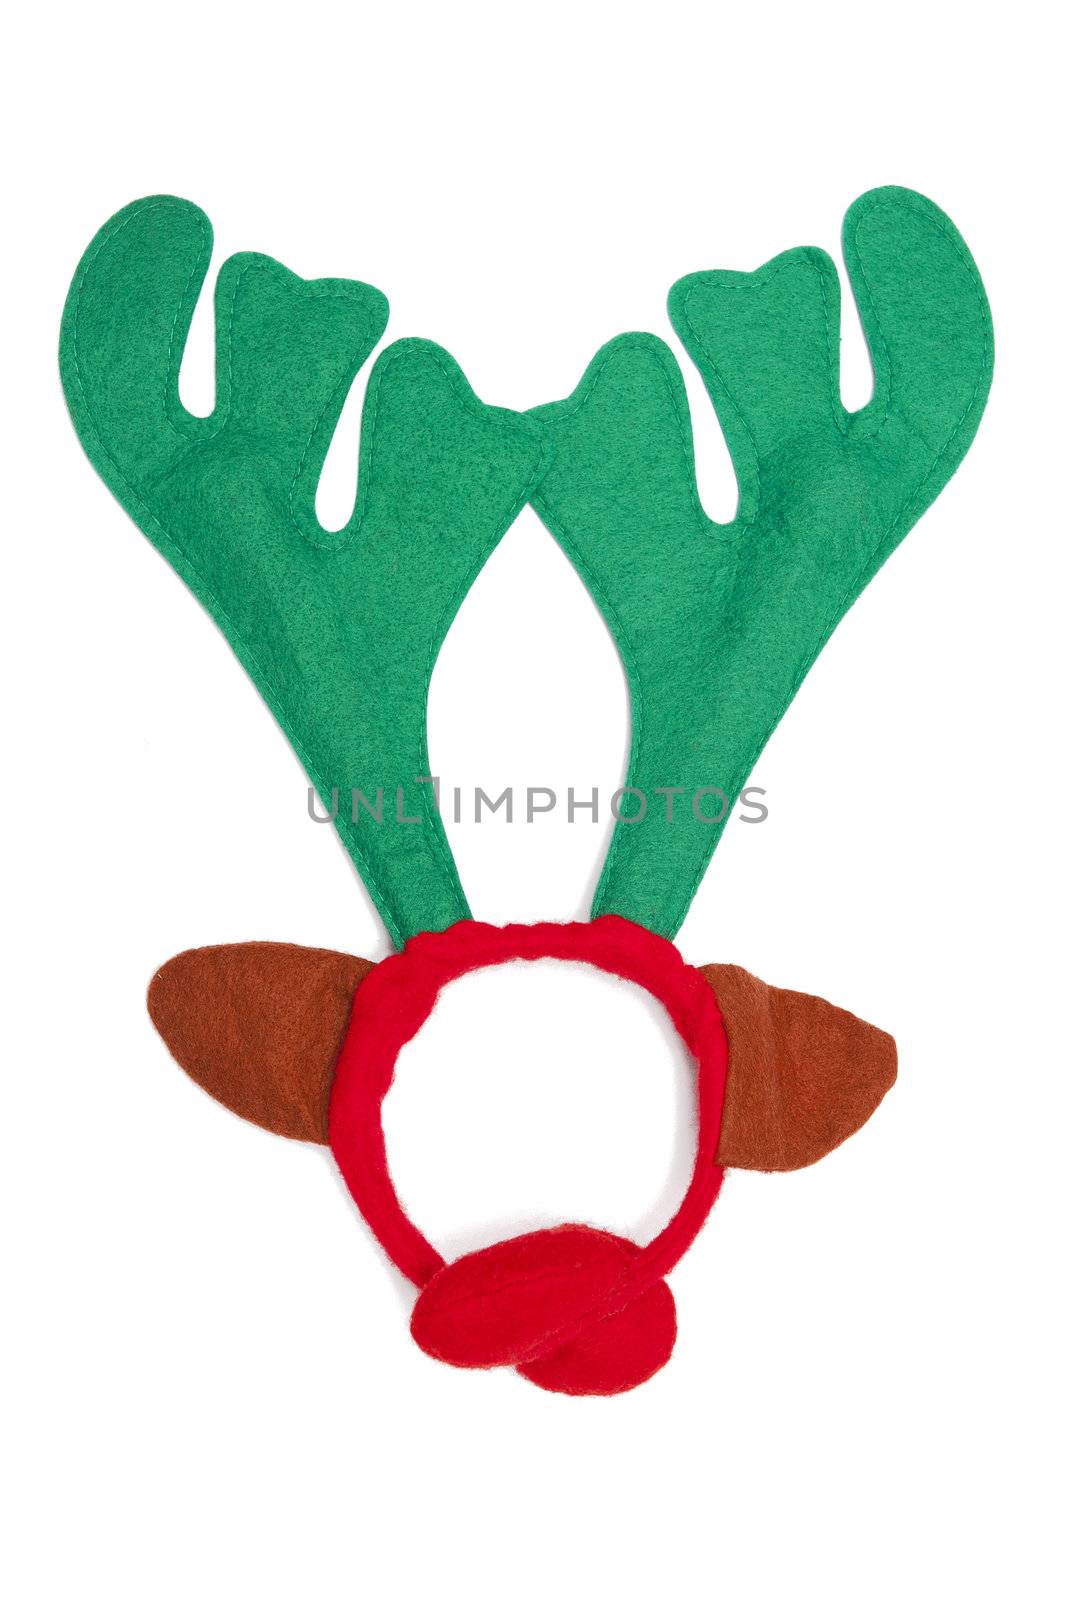 Reindeer isolated on the white background